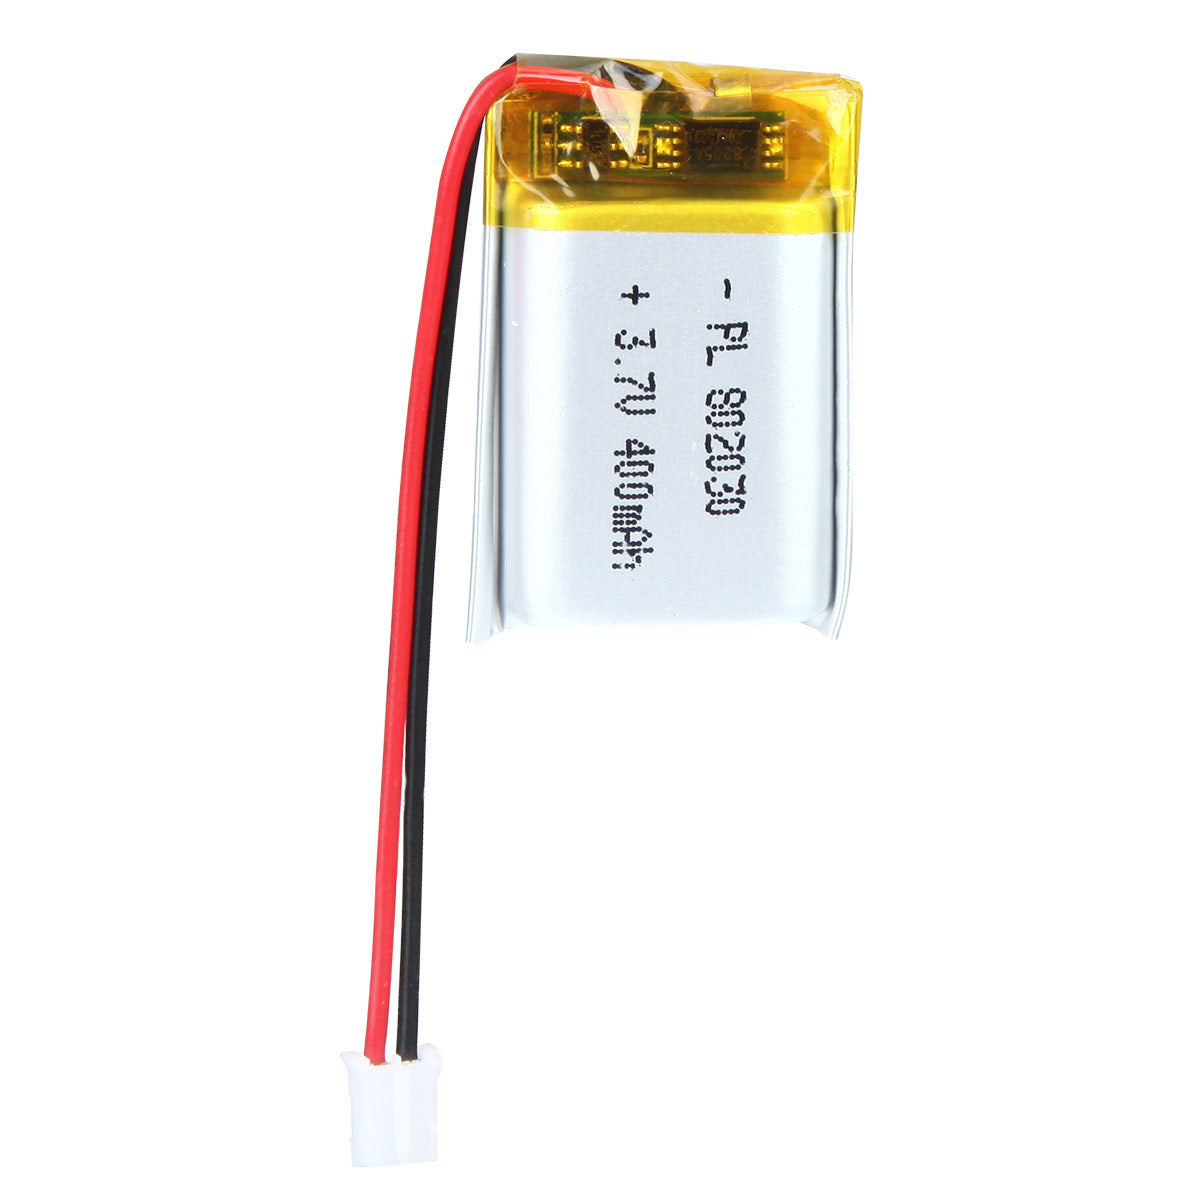 YDL 3.7V 400mAh 802030 Rechargeable Lithium Polymer Battery